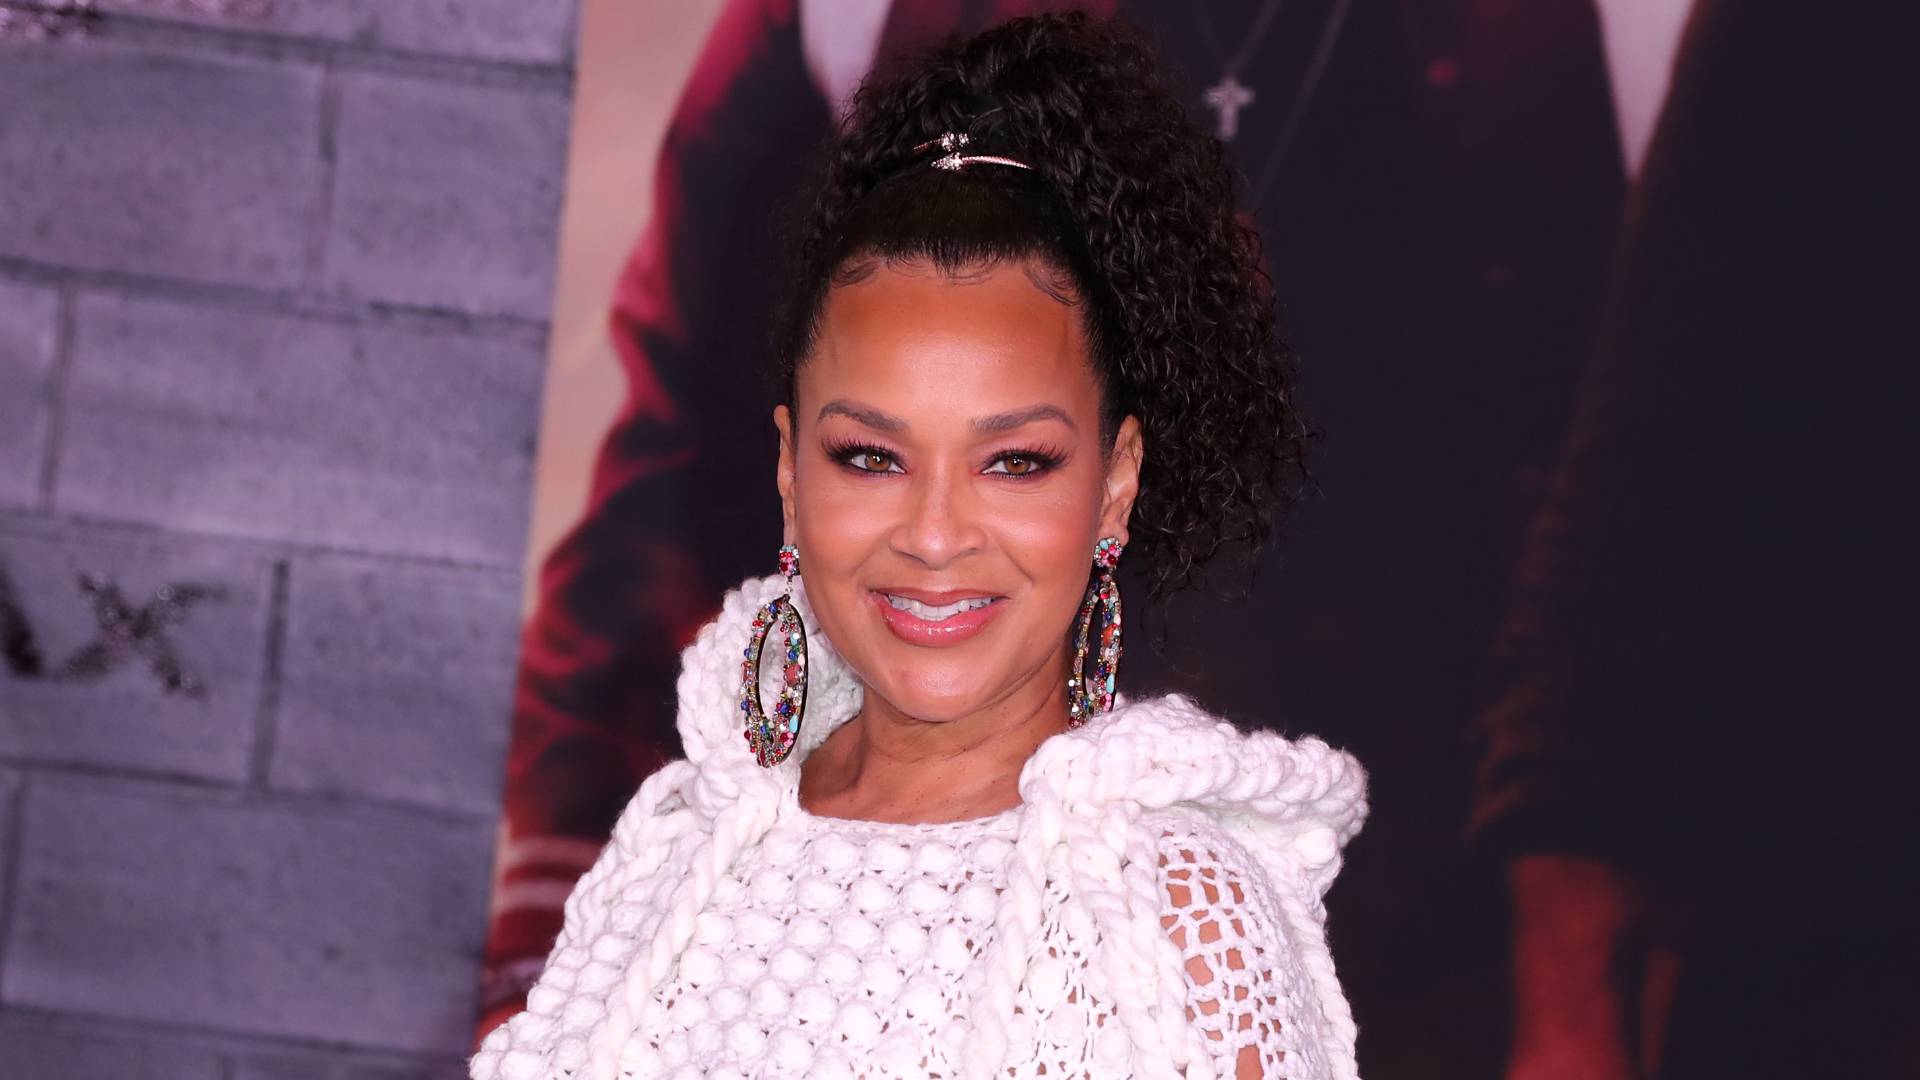 LisaRaye McCoy attends Premiere Of Columbia Pictures' "Bad Boys For Life" at TCL Chinese Theatre on January 14, 2020 in Hollywood, California. 